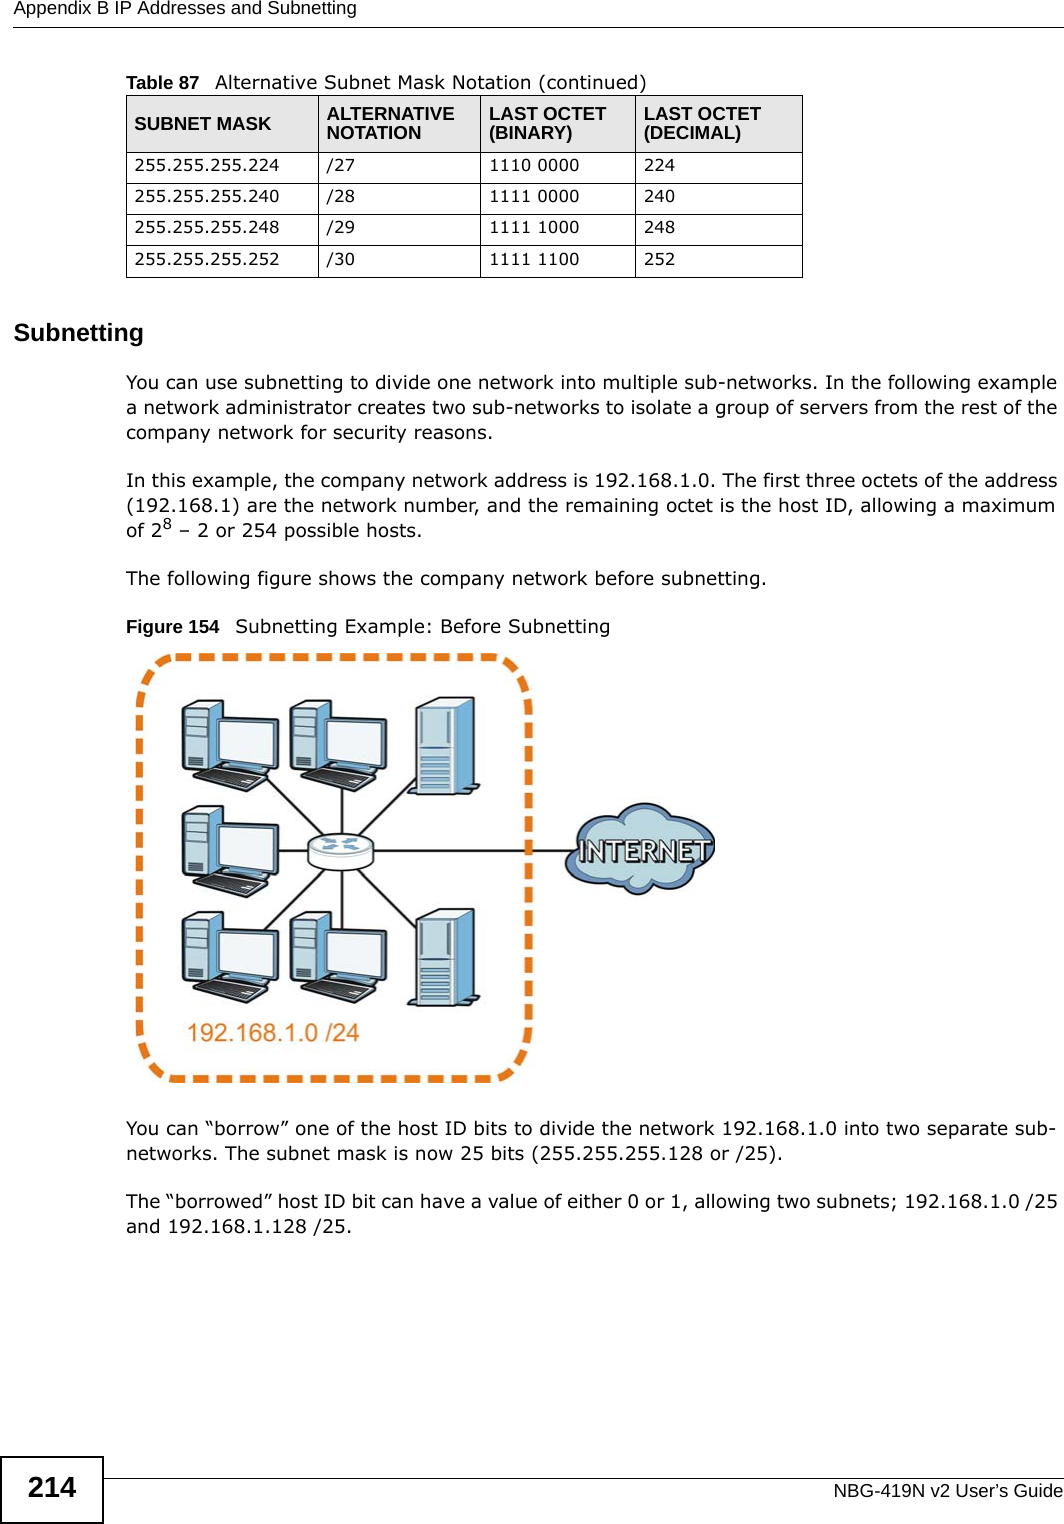 Appendix B IP Addresses and SubnettingNBG-419N v2 User’s Guide214SubnettingYou can use subnetting to divide one network into multiple sub-networks. In the following example a network administrator creates two sub-networks to isolate a group of servers from the rest of the company network for security reasons.In this example, the company network address is 192.168.1.0. The first three octets of the address (192.168.1) are the network number, and the remaining octet is the host ID, allowing a maximum of 28 – 2 or 254 possible hosts.The following figure shows the company network before subnetting.  Figure 154   Subnetting Example: Before SubnettingYou can “borrow” one of the host ID bits to divide the network 192.168.1.0 into two separate sub-networks. The subnet mask is now 25 bits (255.255.255.128 or /25).The “borrowed” host ID bit can have a value of either 0 or 1, allowing two subnets; 192.168.1.0 /25 and 192.168.1.128 /25. 255.255.255.224 /27 1110 0000 224255.255.255.240 /28 1111 0000 240255.255.255.248 /29 1111 1000 248255.255.255.252 /30 1111 1100 252Table 87   Alternative Subnet Mask Notation (continued)SUBNET MASK ALTERNATIVE NOTATION LAST OCTET (BINARY) LAST OCTET (DECIMAL)